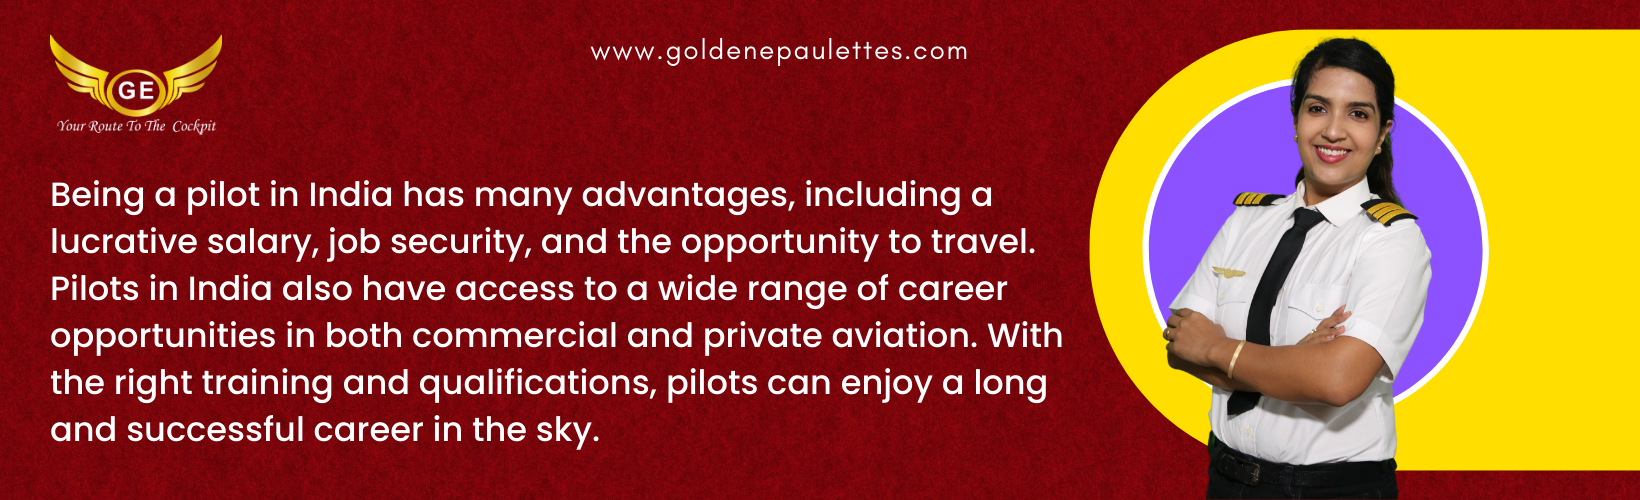 What are the Benefits of Being a Pilot in India